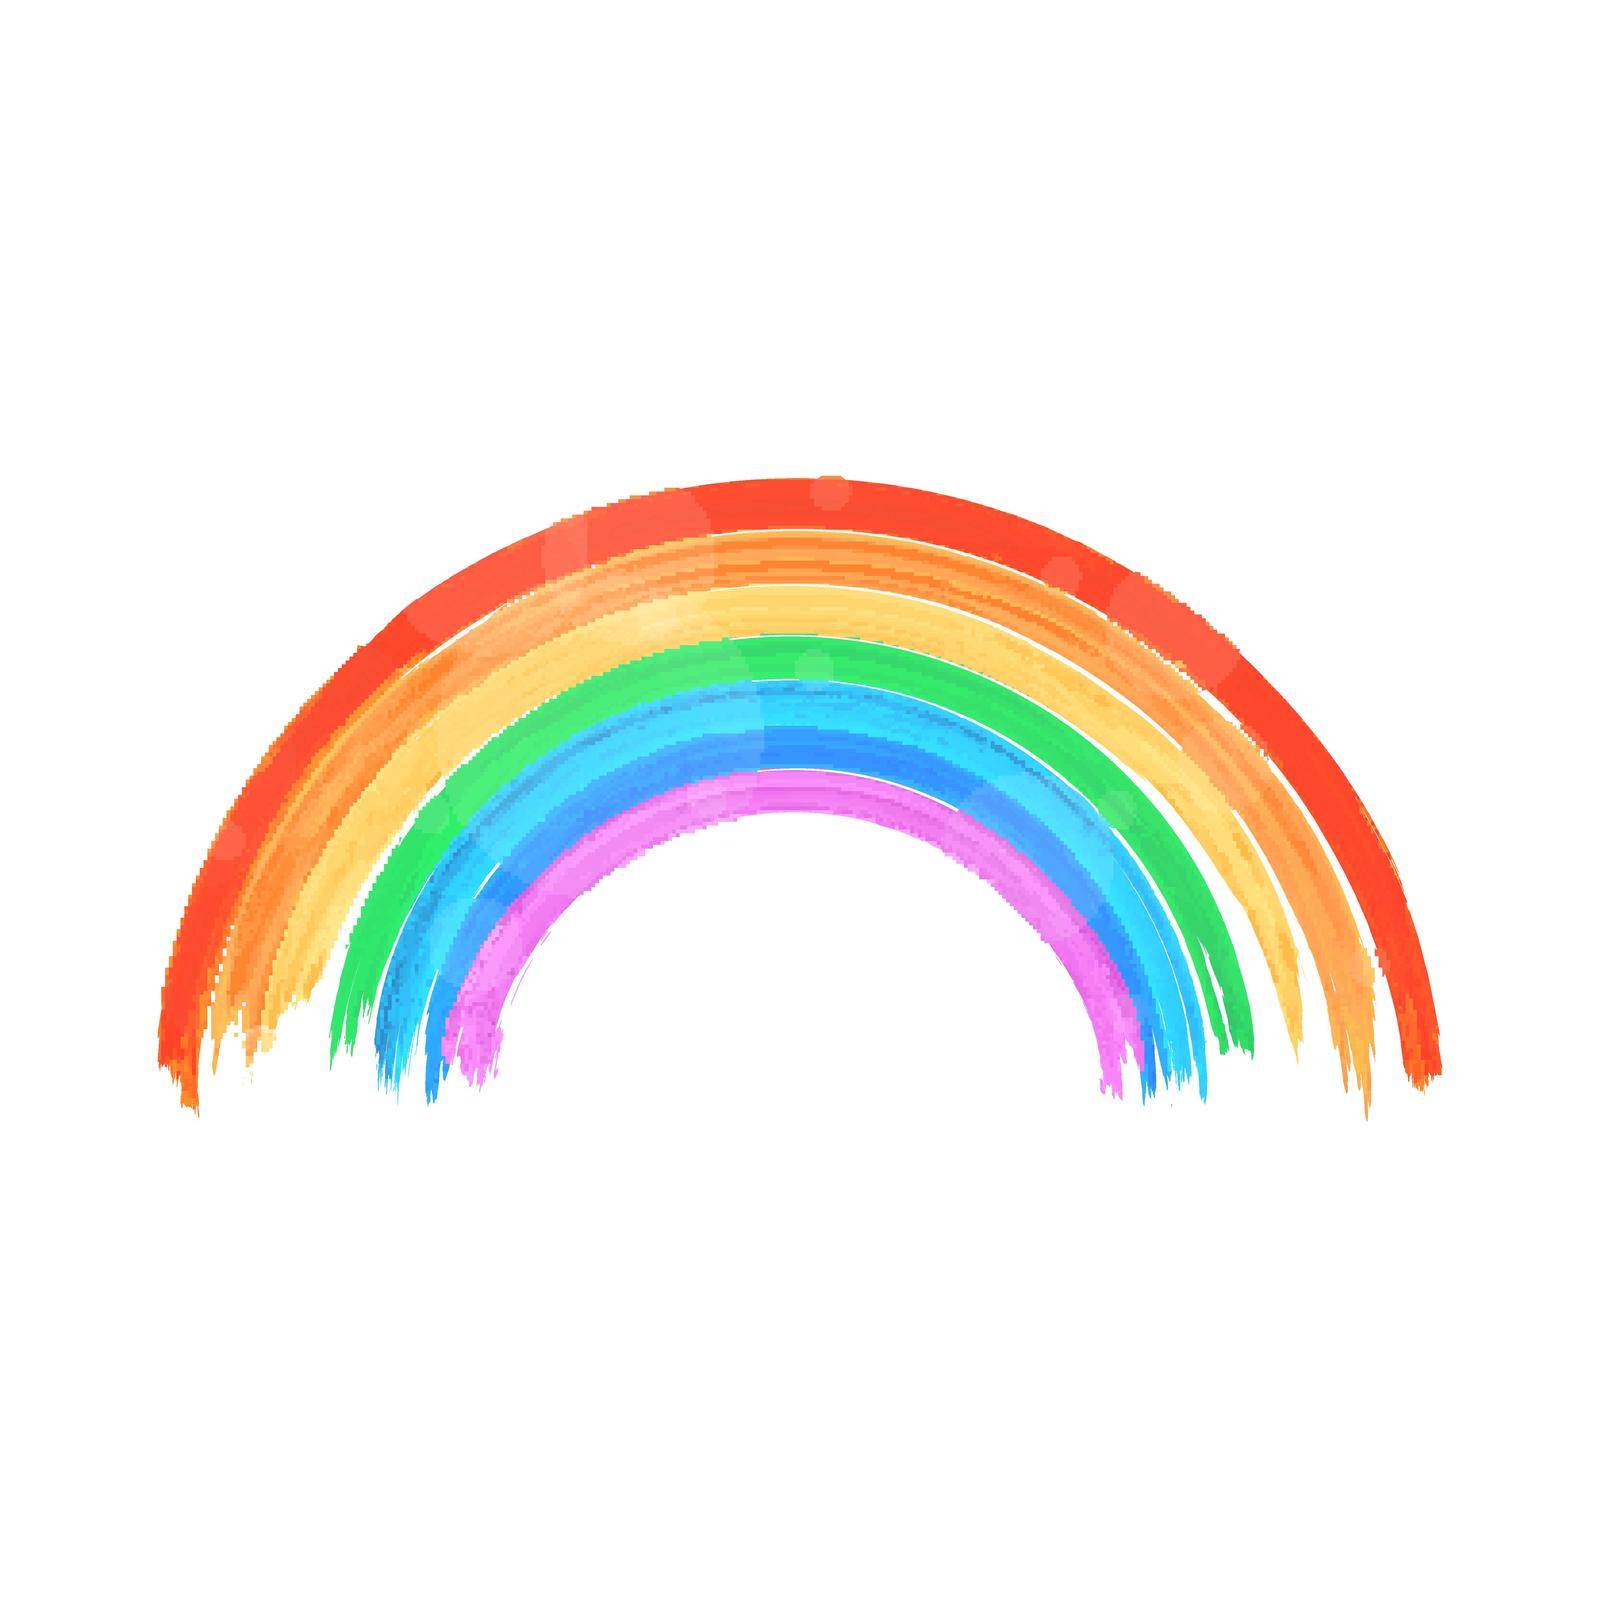 Painted shiny rainbow, vector icon over white